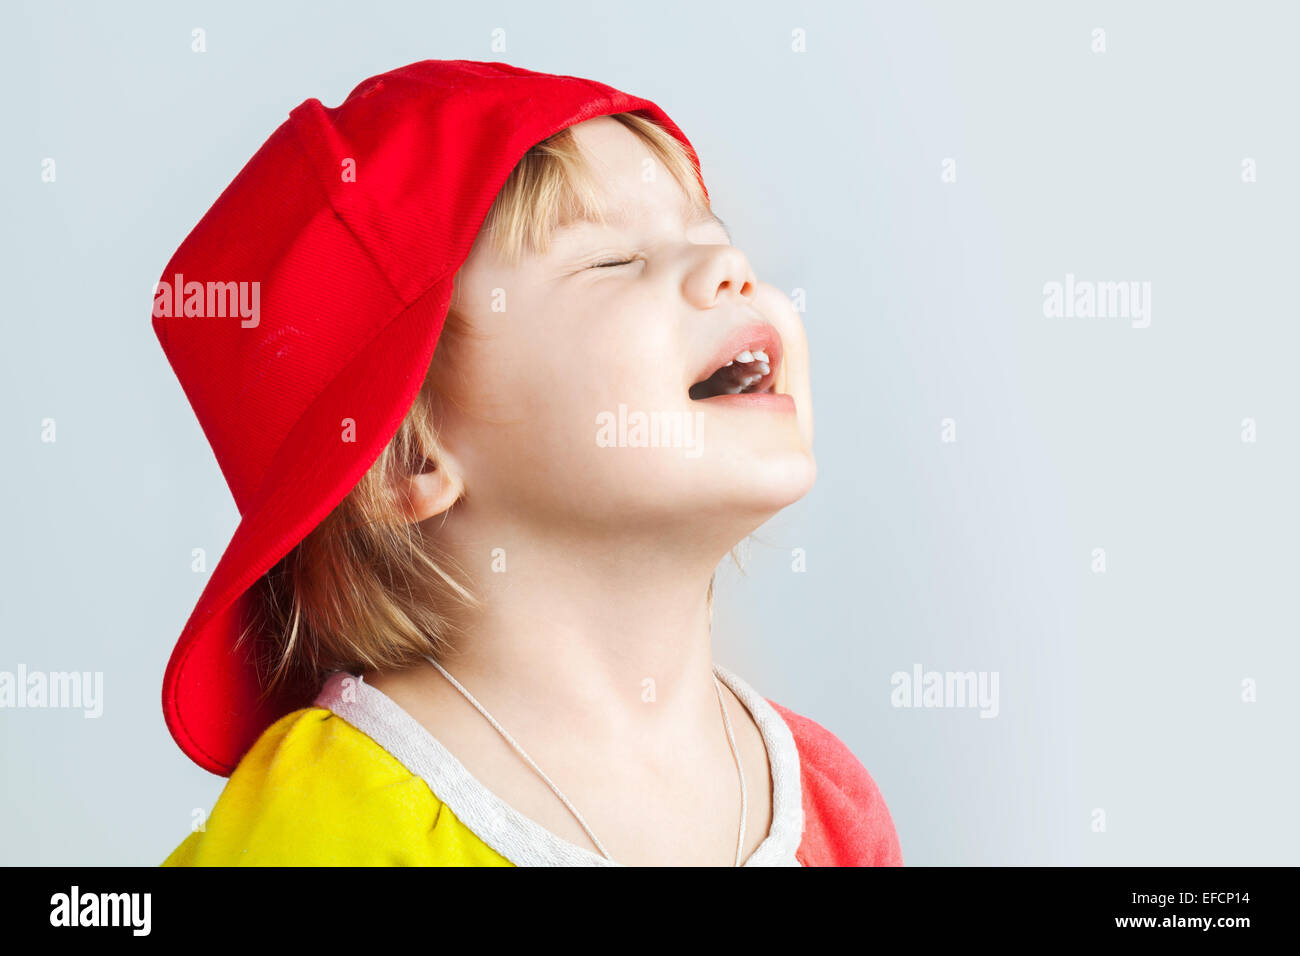 Studio portrait of happy baby girl in red baseball cap over gray wall background Stock Photo